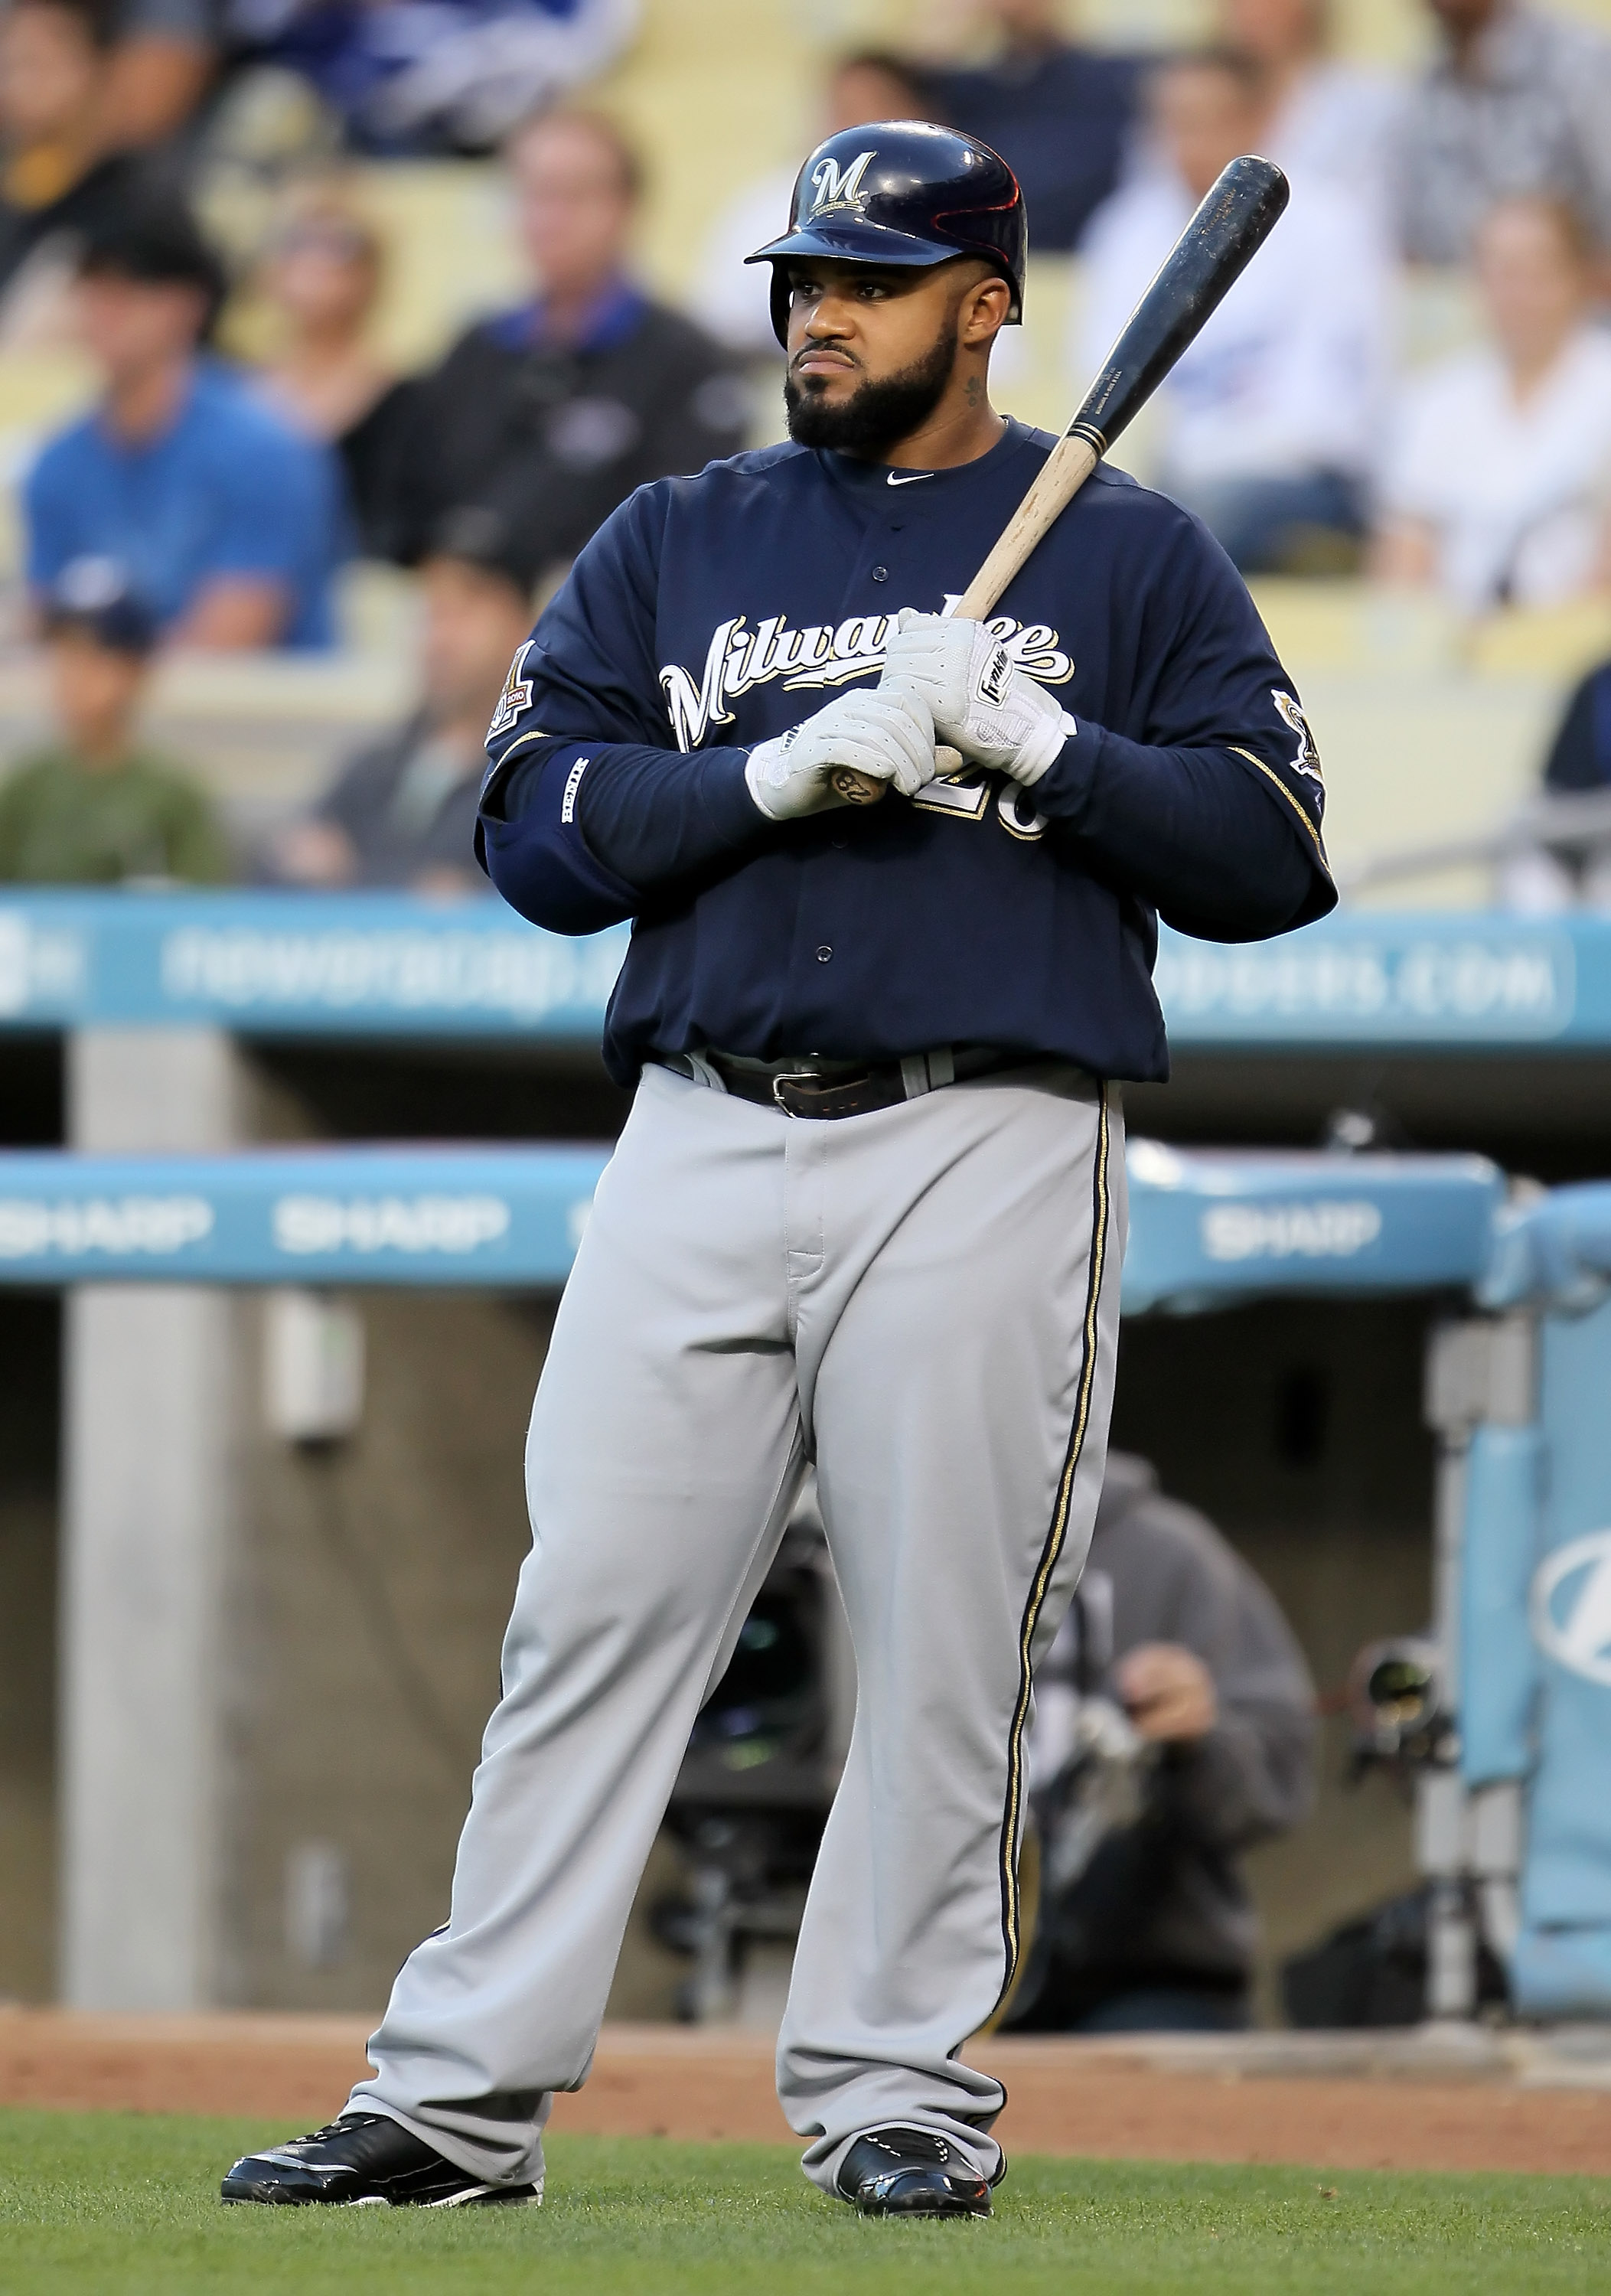 LOS ANGELES, CA - MAY 06:  Prince Fielder #28 of the Milwaukee Brewers waits to bat in the first inning against the Los Angeles Dodgers at Dodger Stadium on May 6, 2010 in Los Angeles, California.  The Dodgers defeated the Brewers 7-3.  (Photo by Jeff Gro